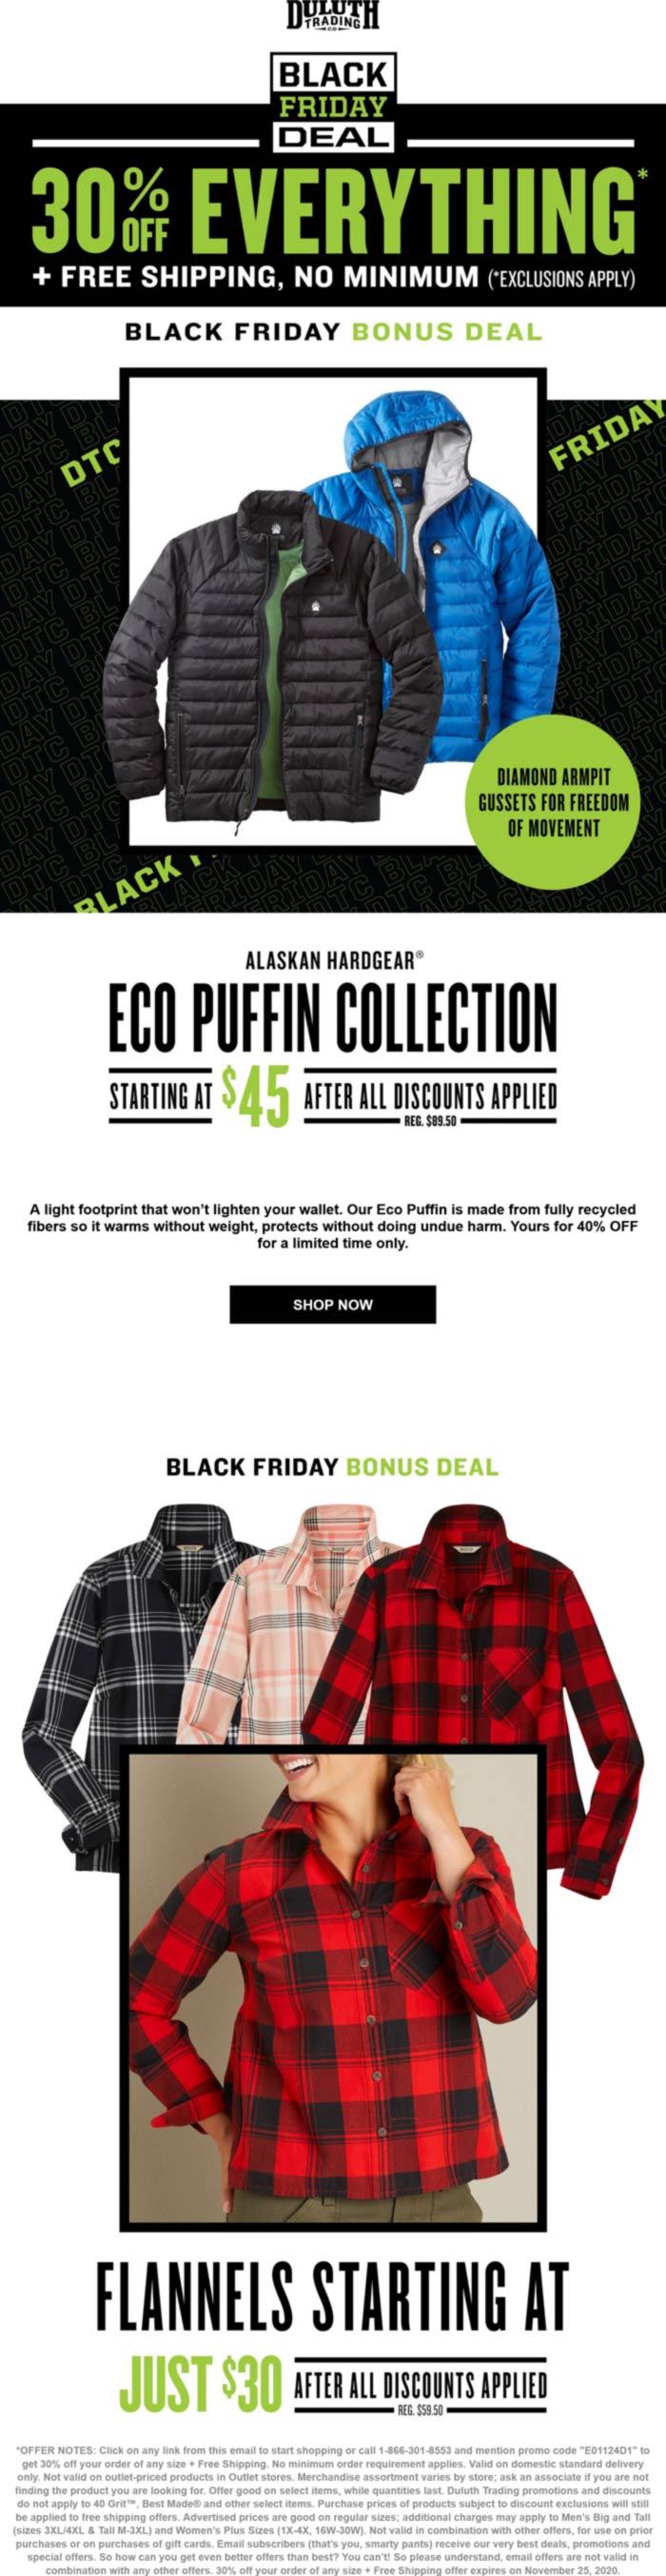 Duluth Trading Co stores Coupon  30% off everything today at Duluth Trading Co, ditto online #duluthtradingco 